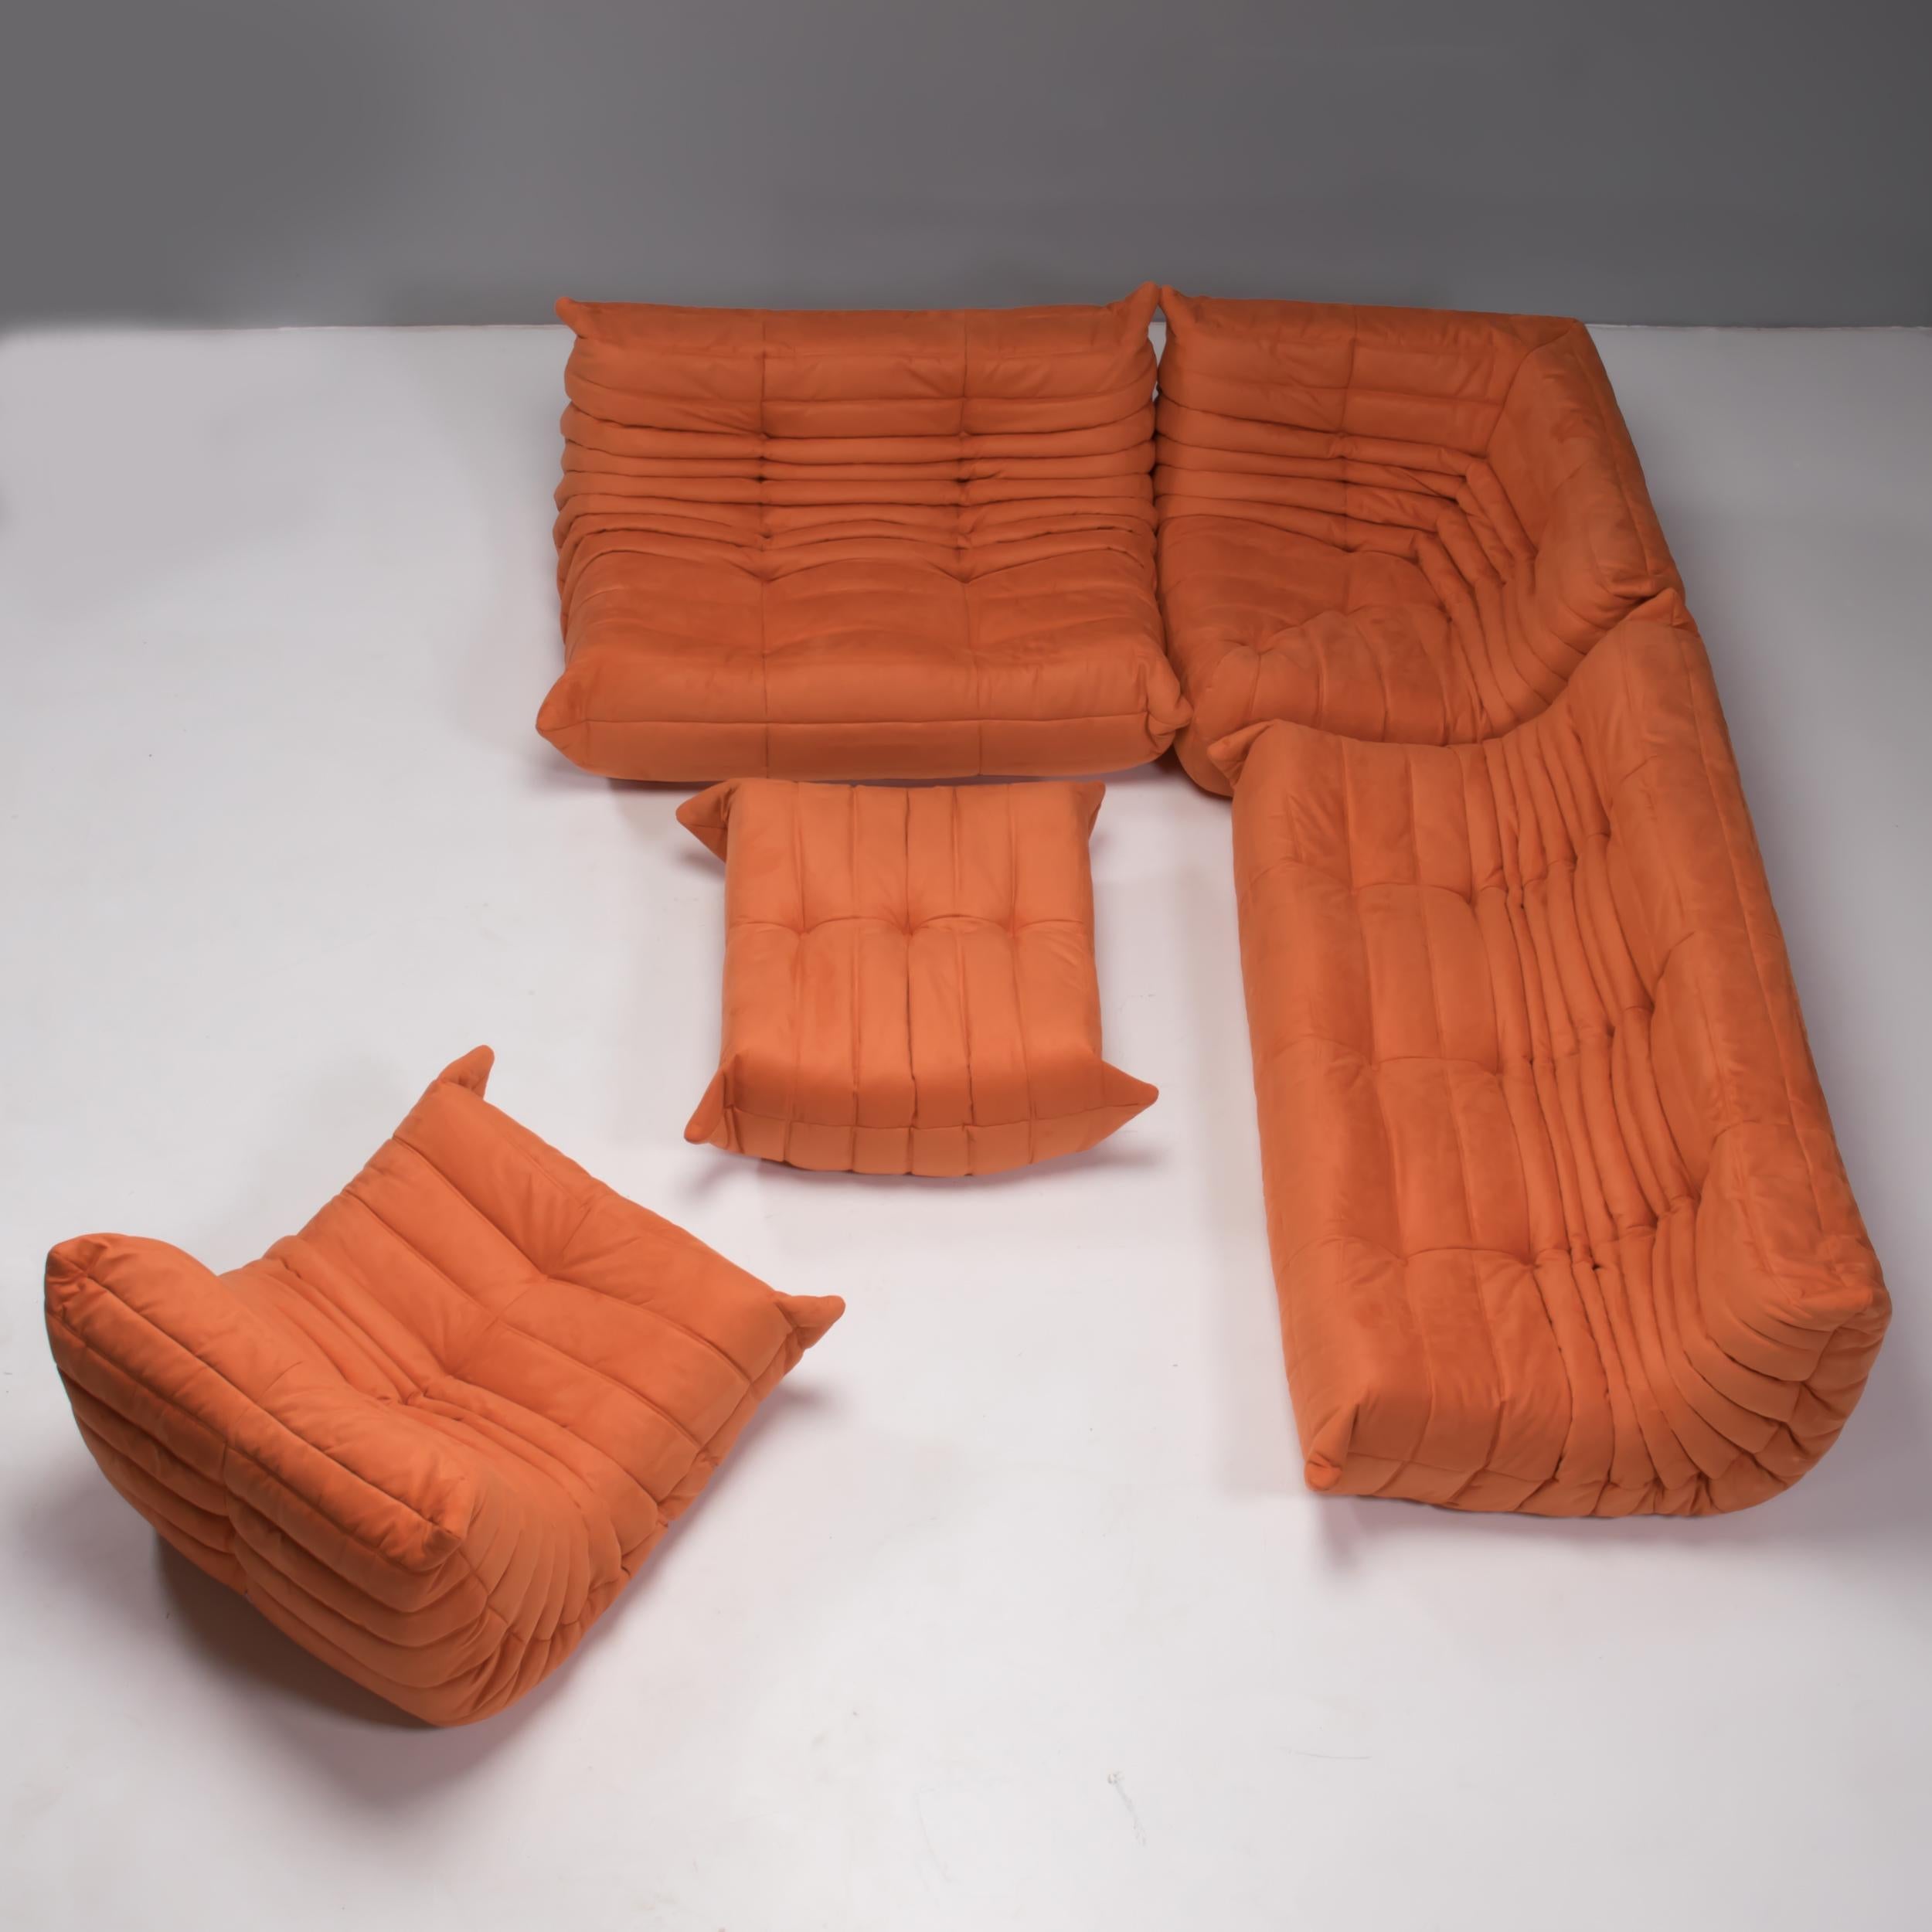 The iconic Togo orange sofa set, originally designed by Michel Ducaroy for Ligne Roset in 1973, has become a design mid century classic.

The sofas have been newly reupholstered in a soft bright orange coloured fabric. Made completely from foam,